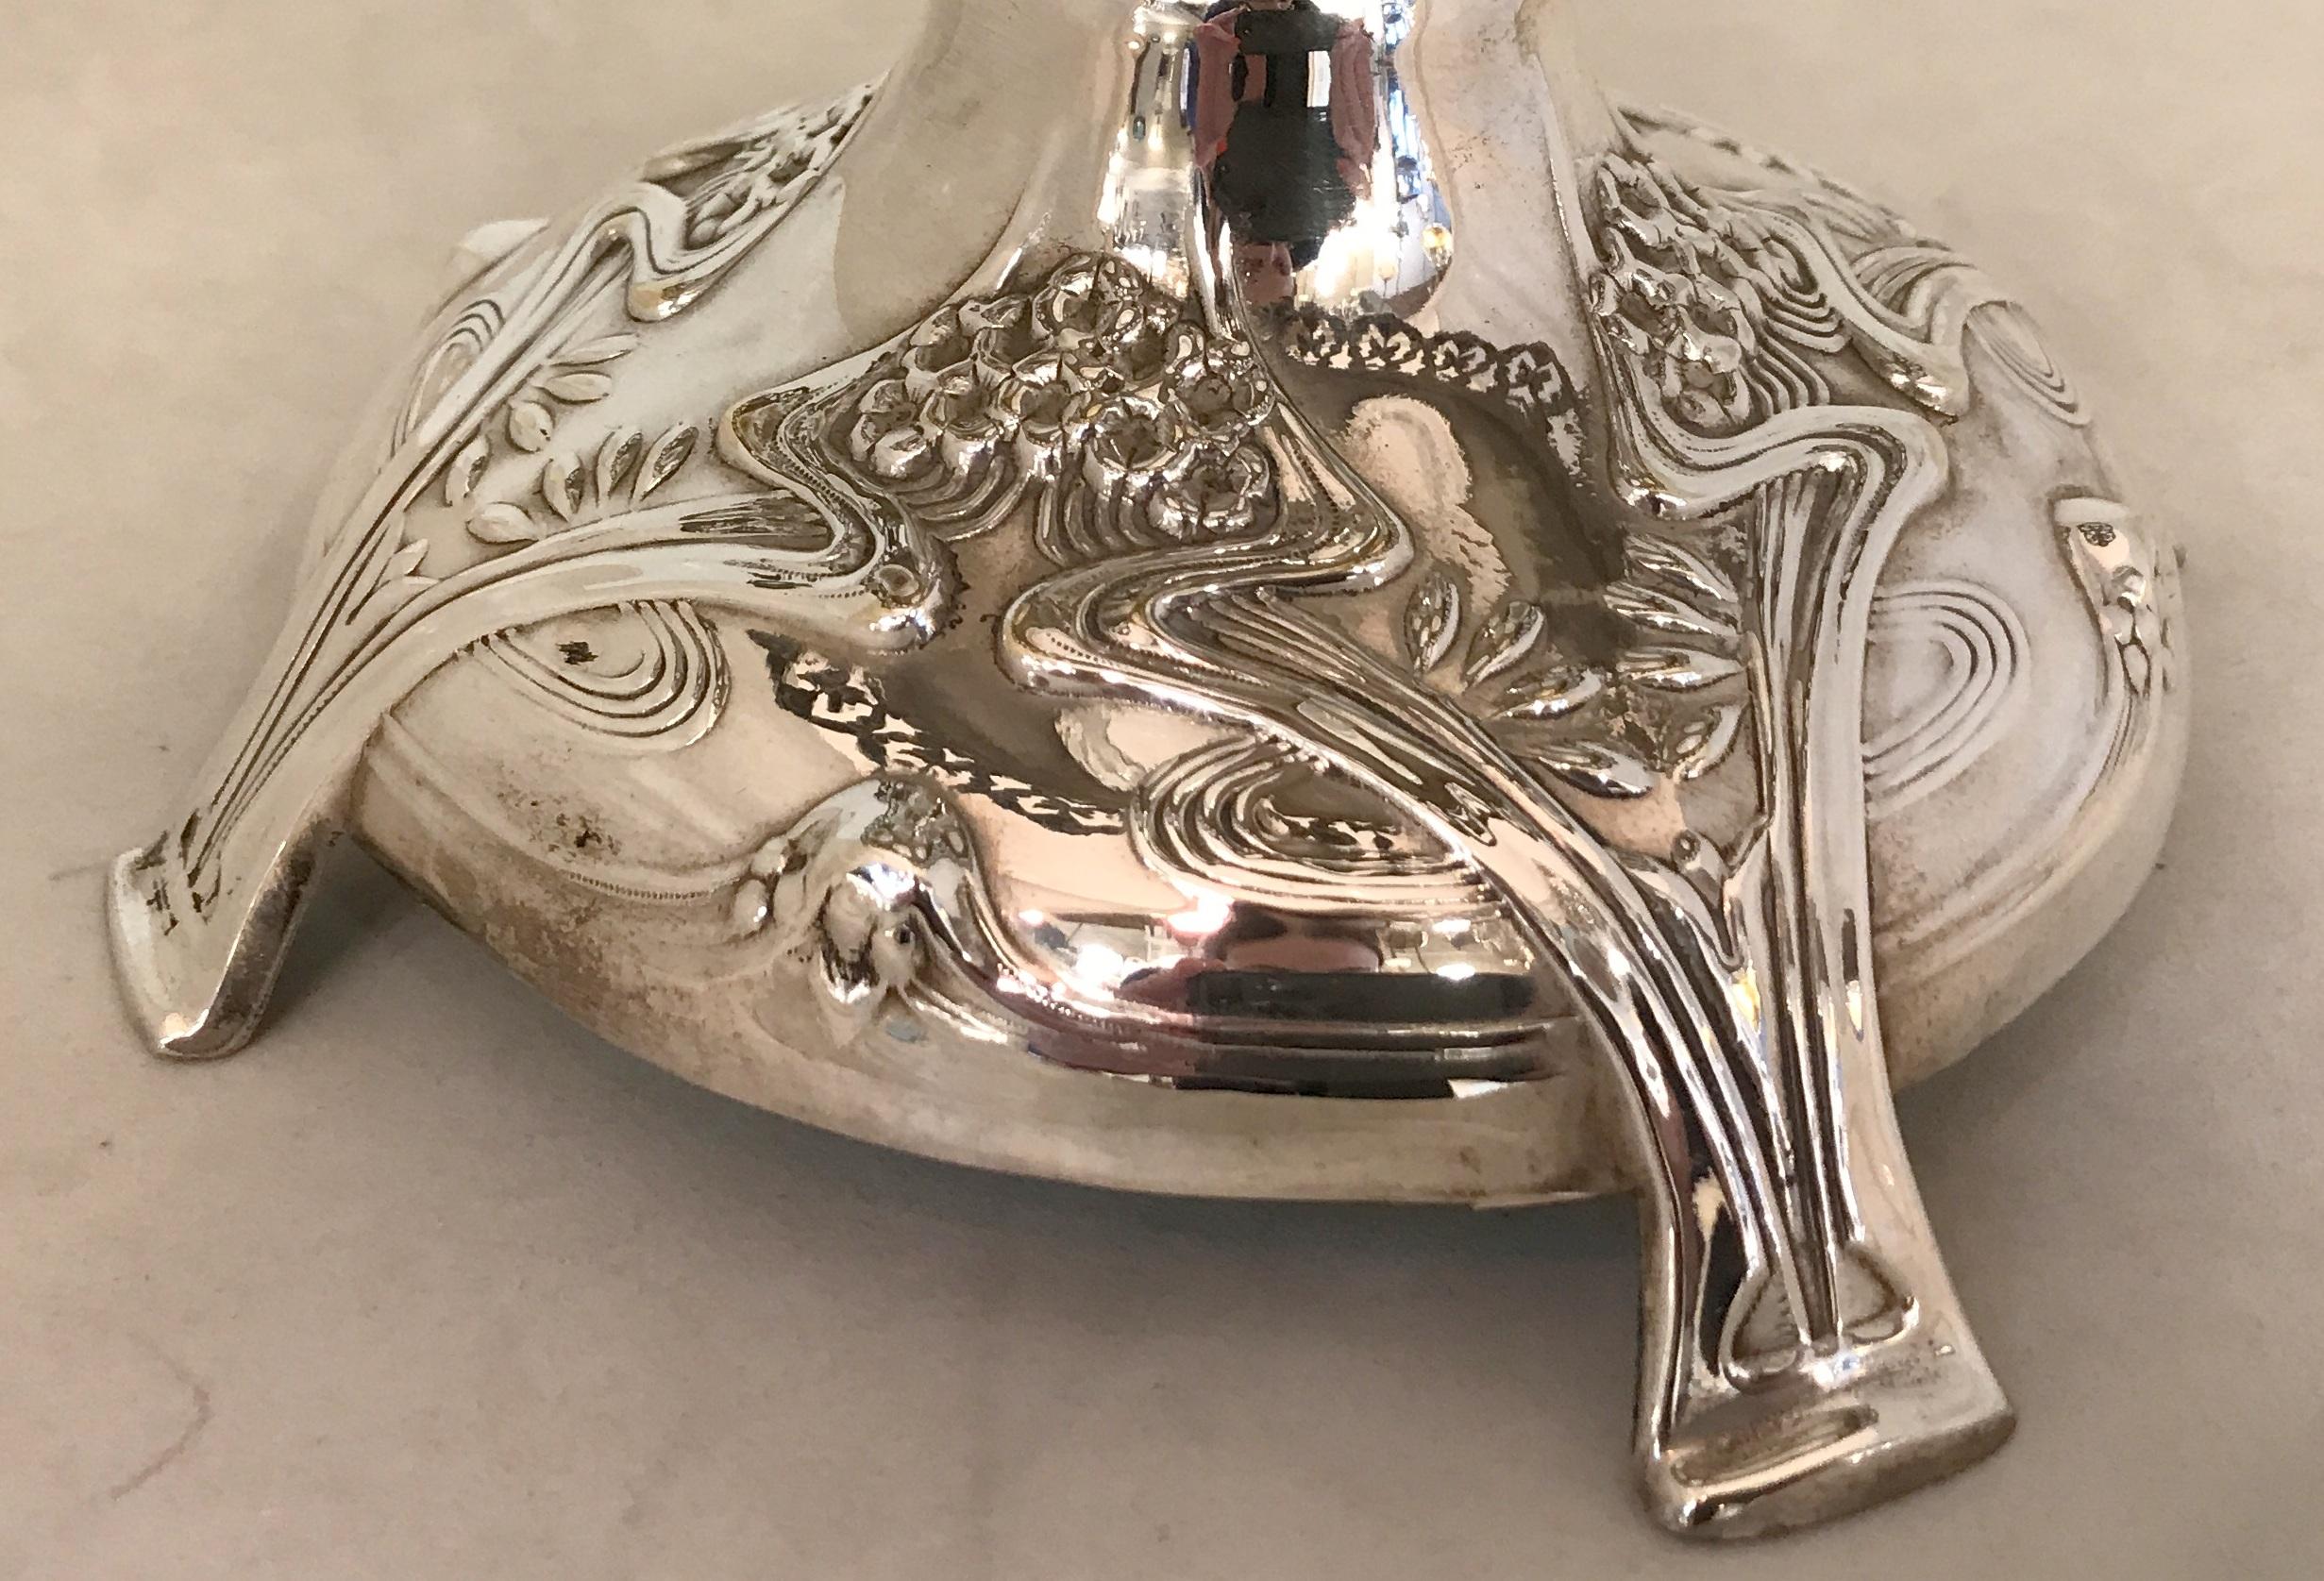 Luncheon and dinner cruet WMF

Style: Art Nouveau, Jugendstil, Liberty
year: 1859
Country: Germany
Materials: silver plated
Several of the WMF objects can be seen in museums
We have specialized in the sale of Art Deco and Art Nouveau and